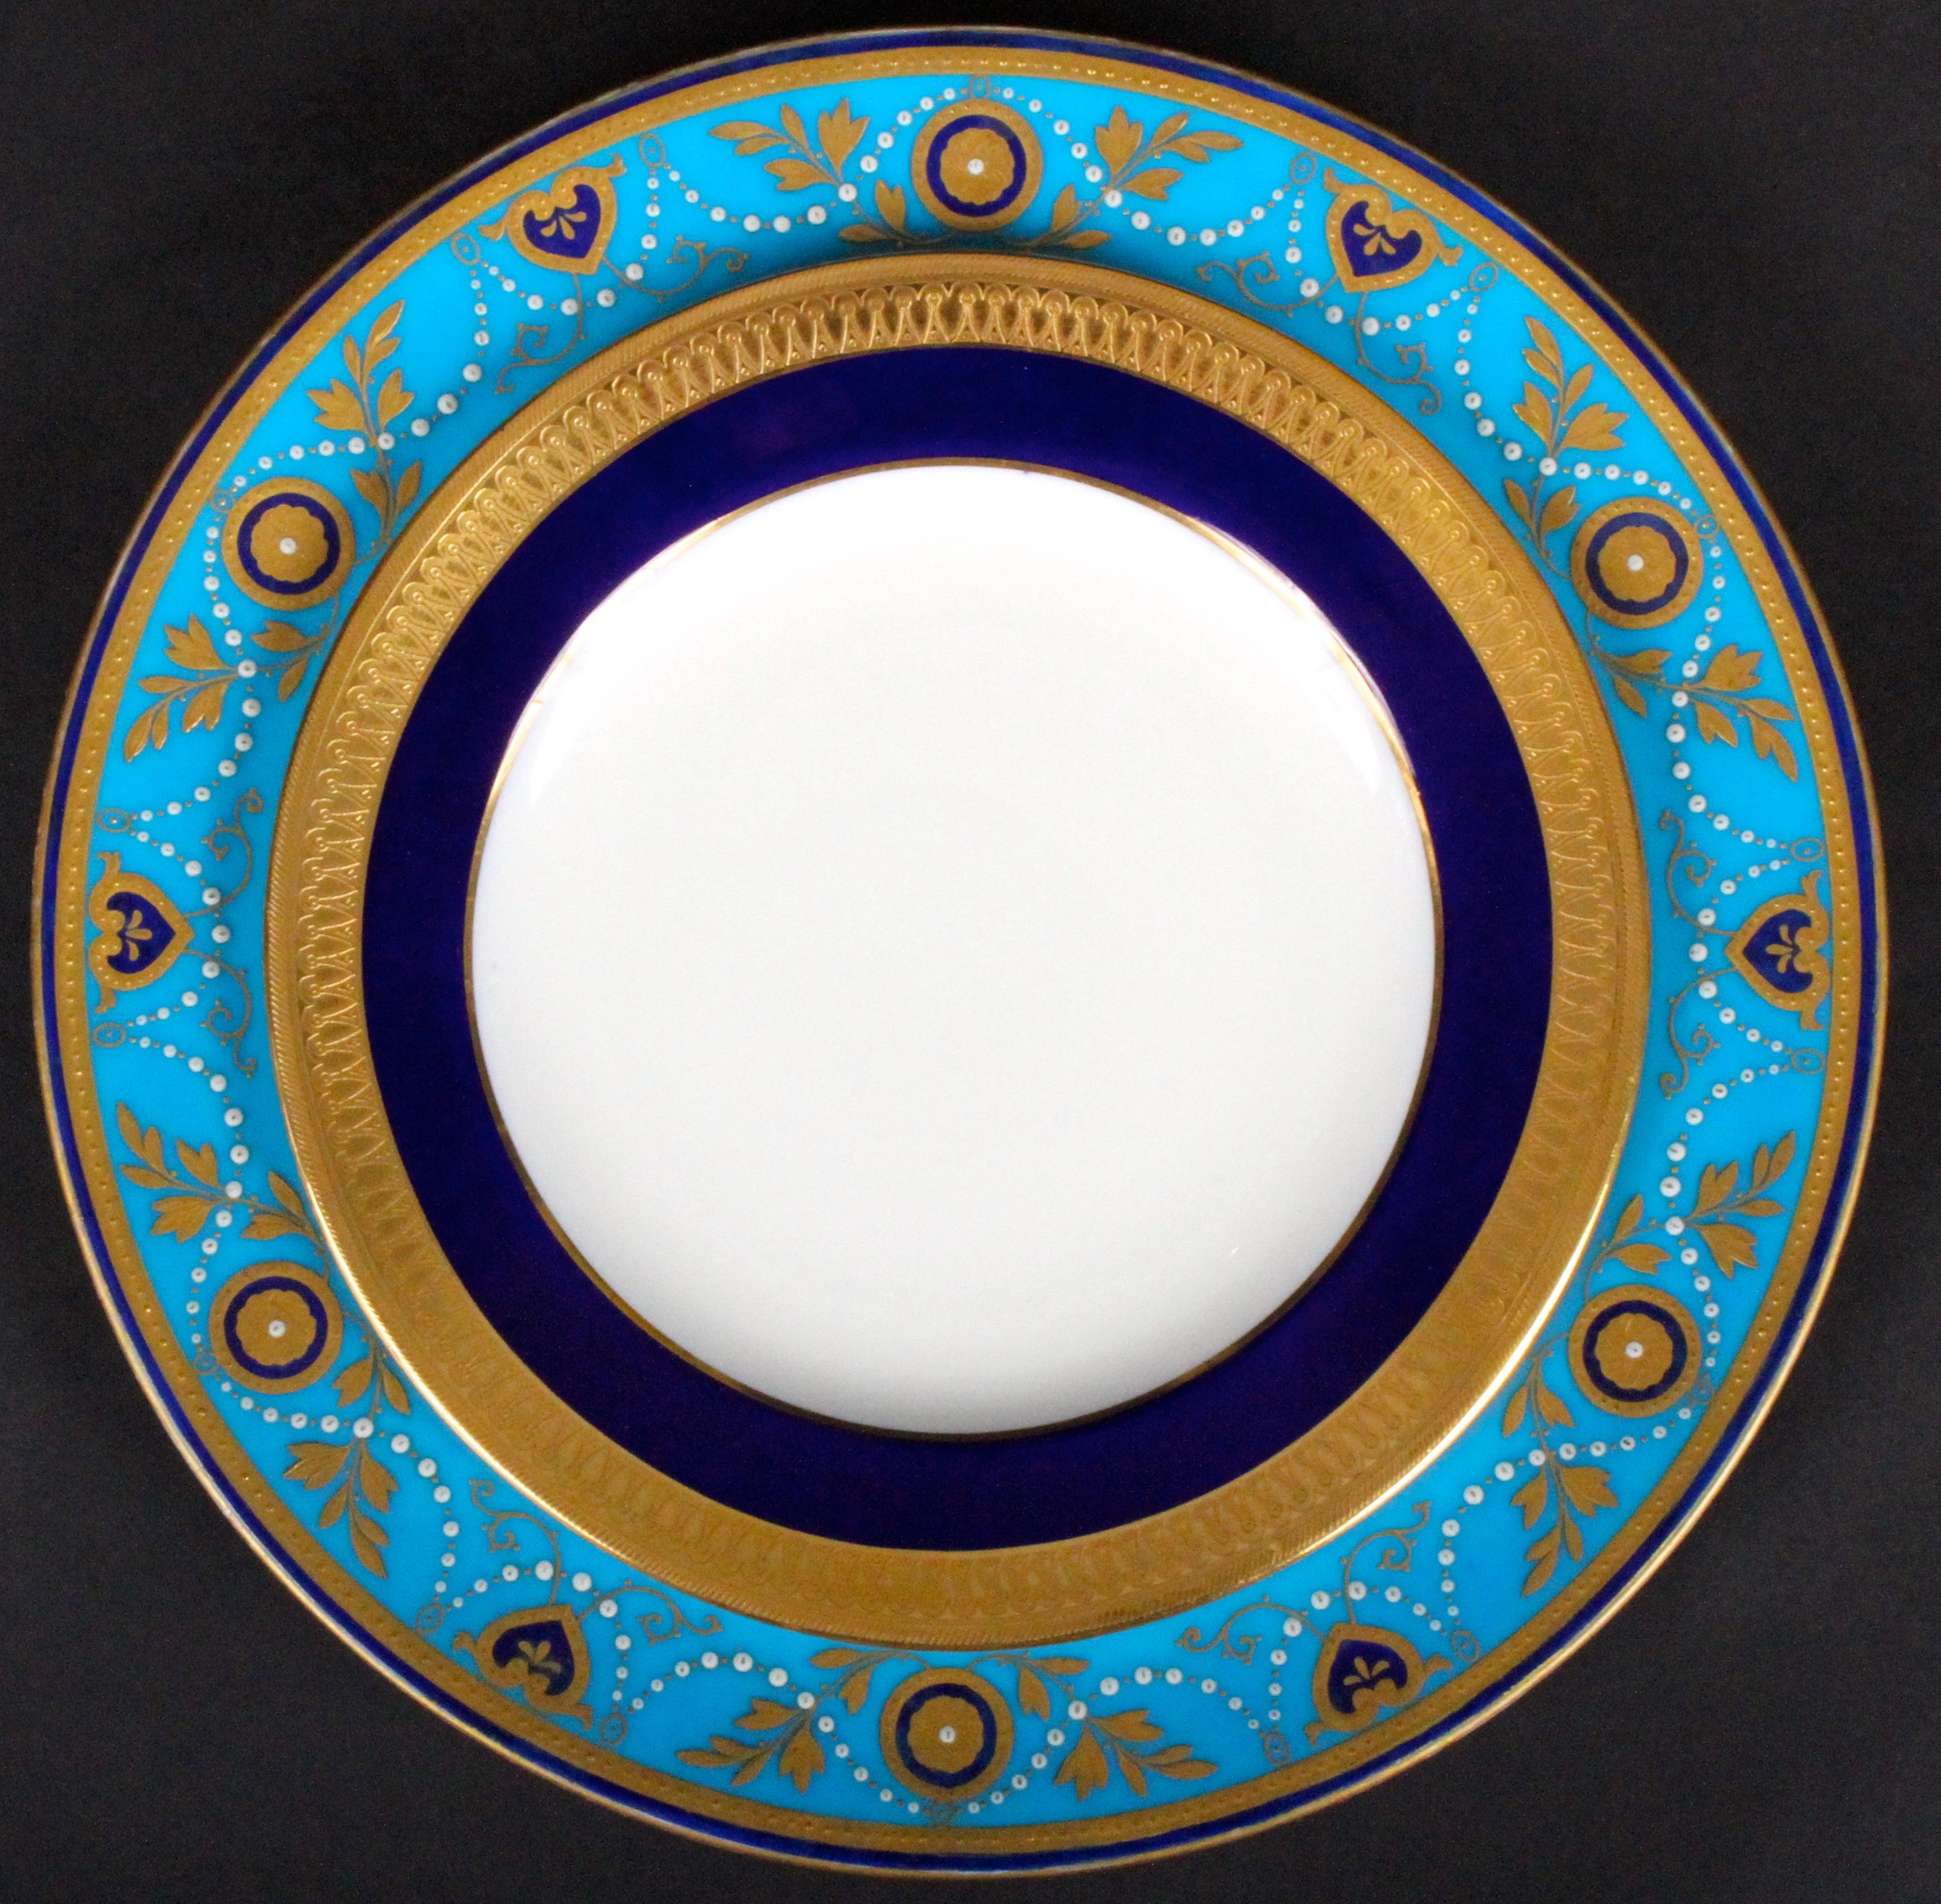 This is a set of 12 armorial-ware 22-karat gold encrusted and raised-paste gold porcelain dinner or service plates, with 12 coordinating plates. They were made by Minton, Stoke-on-Trent, England. The plates feature Minton’s most popular color,